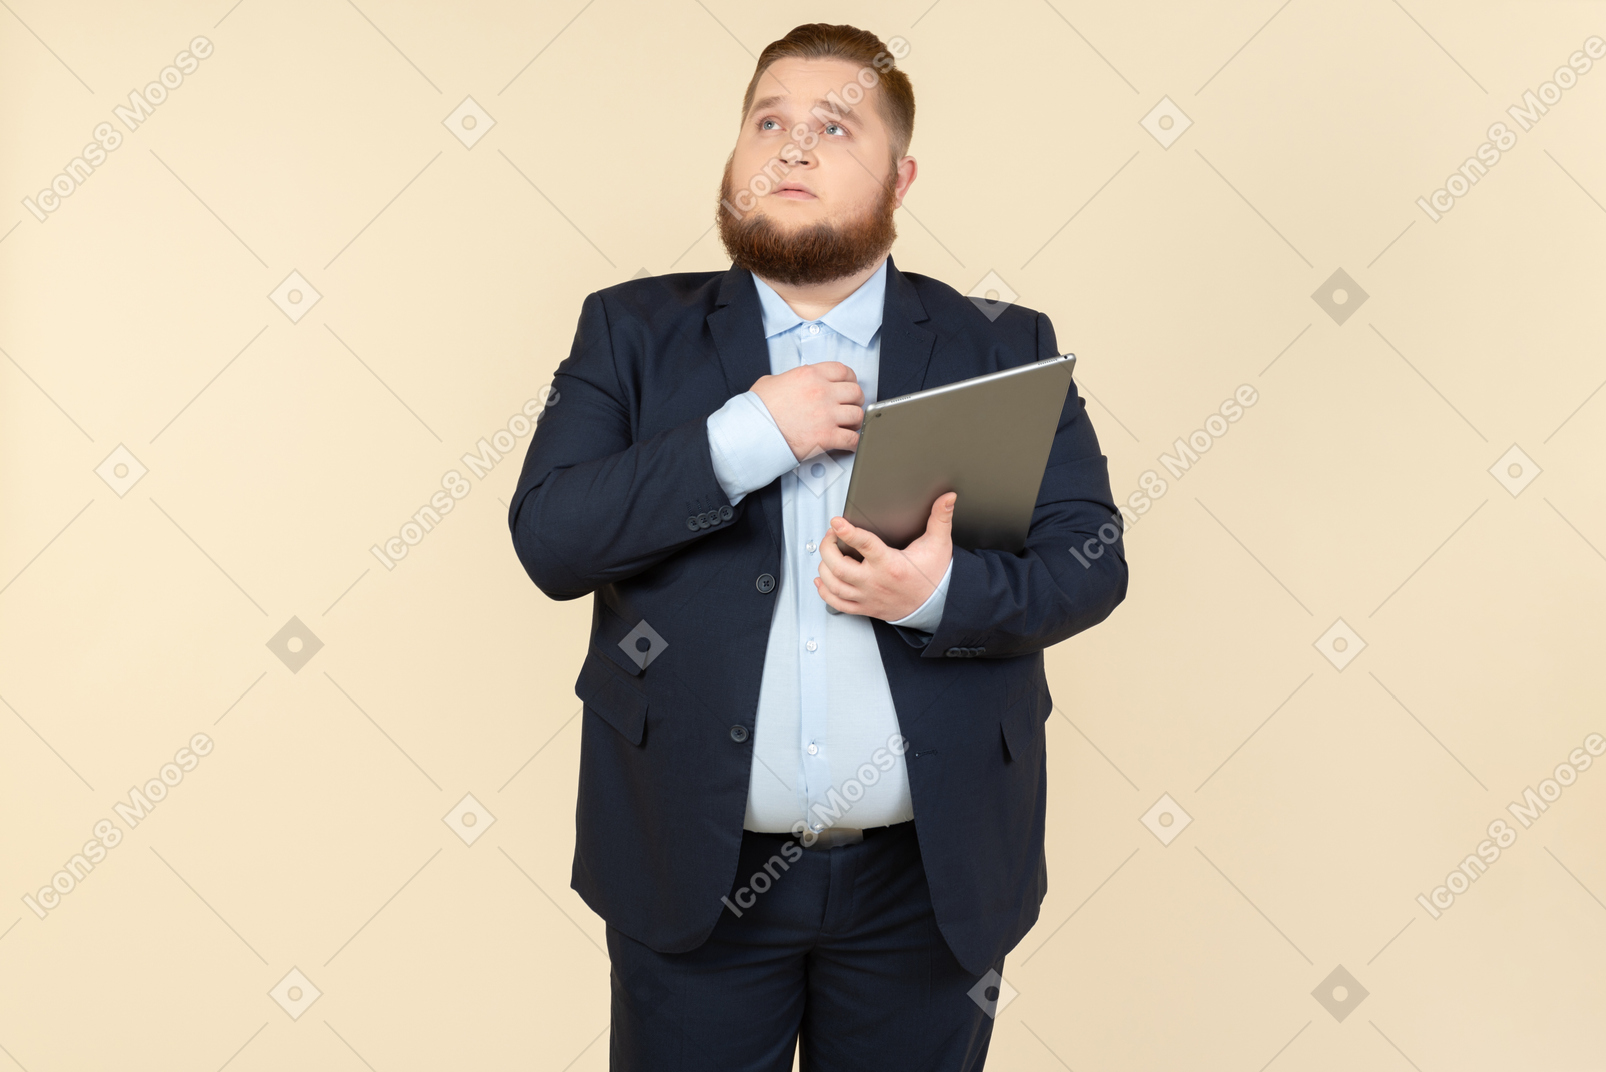 Dreamy looking young office worker holding digital tablet